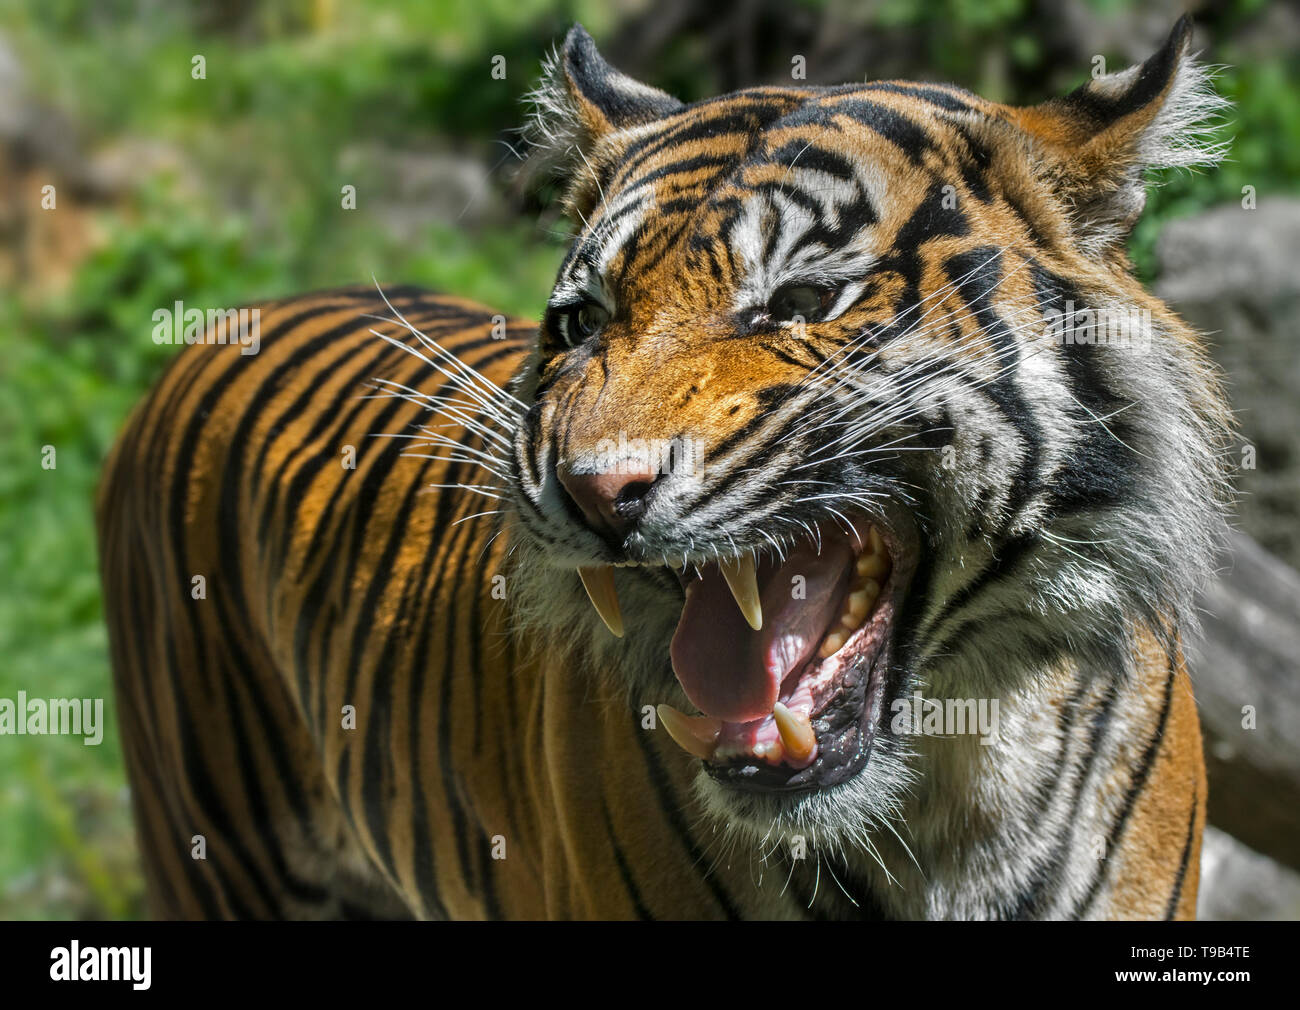 Close-up of growling / roaring Sumatran tiger (Panthera tigris sondaica) showing incisors and canines in open mouth, native to Sumatra, Indonesia Stock Photo